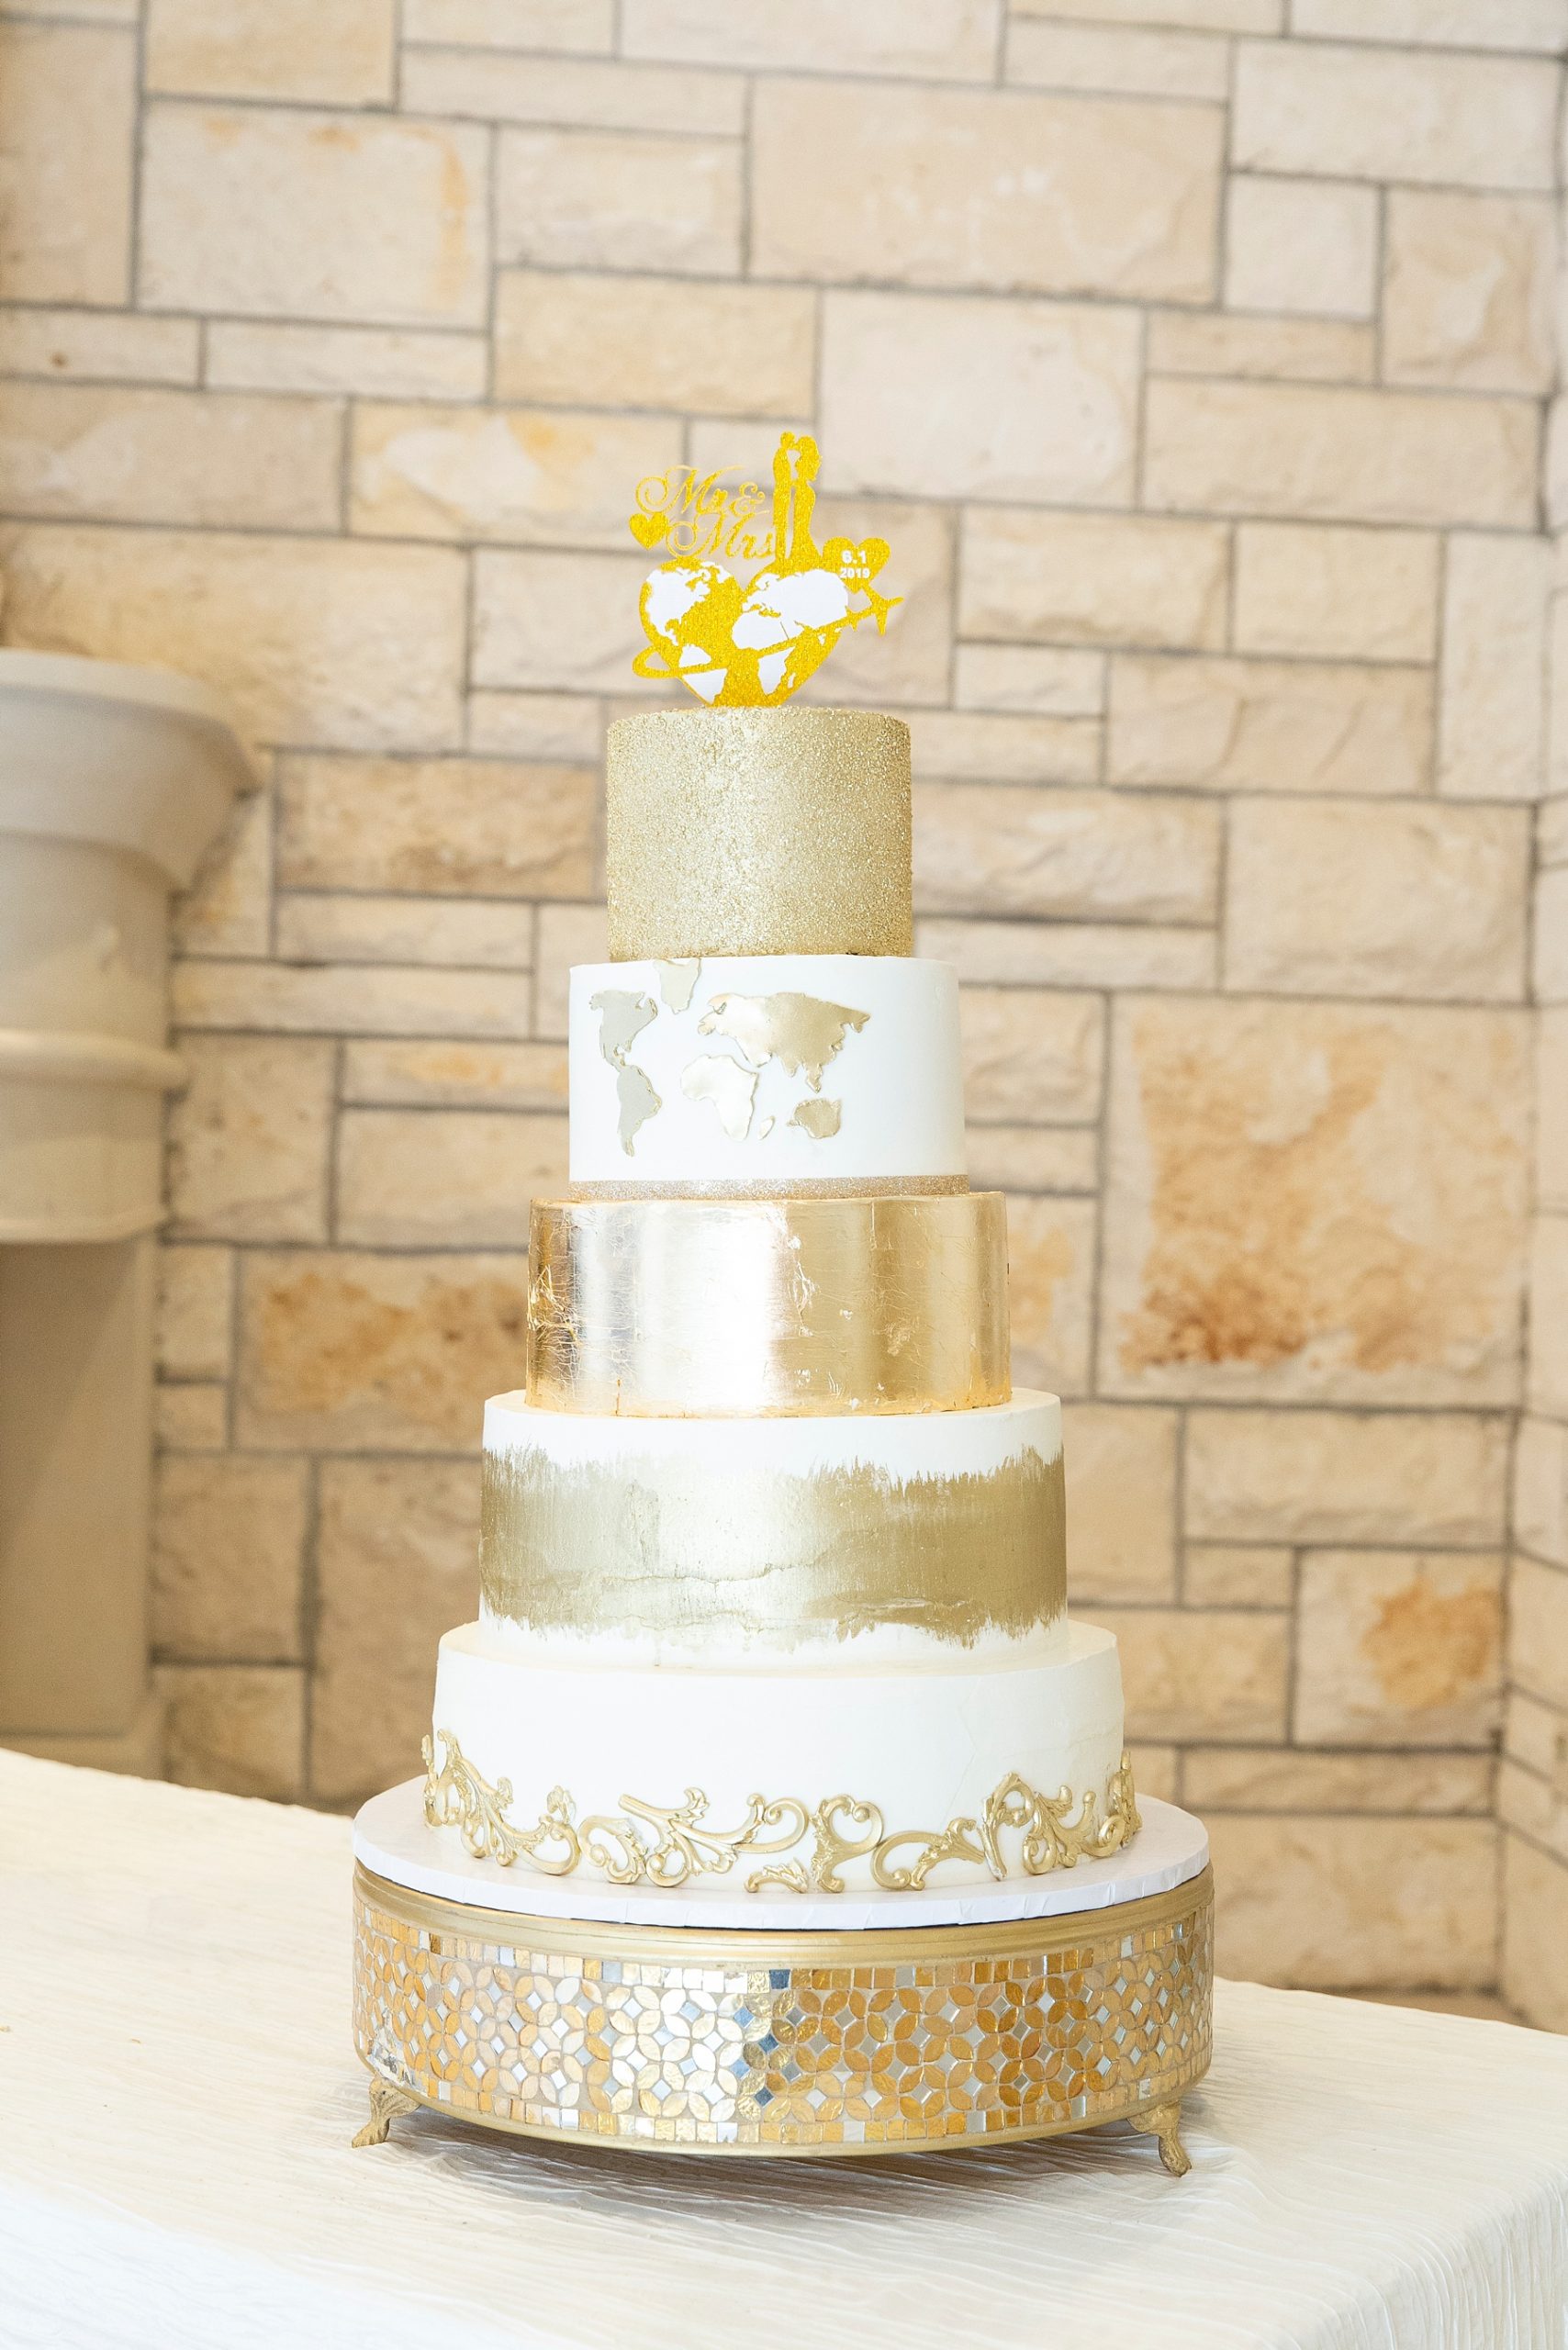 gold and ivory travel inspired wedding cake photographed by Randi Michelle Weddings